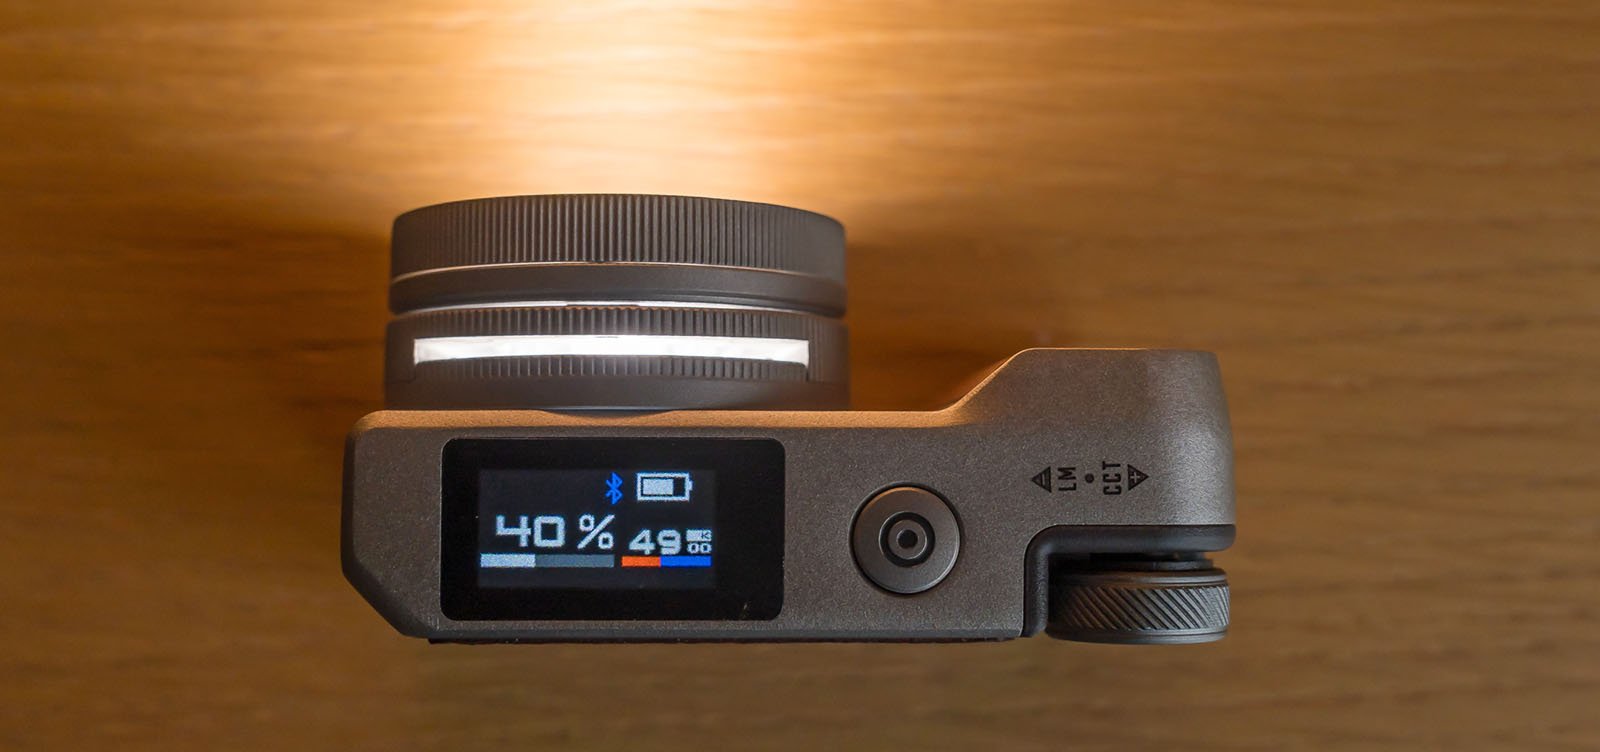 A top view of a digital camera placed on a wooden surface, showing battery information on its small screen. The screen displays a battery level of 40% and indicates the camera is on. The lens and control dial are visible at the left side of the camera.